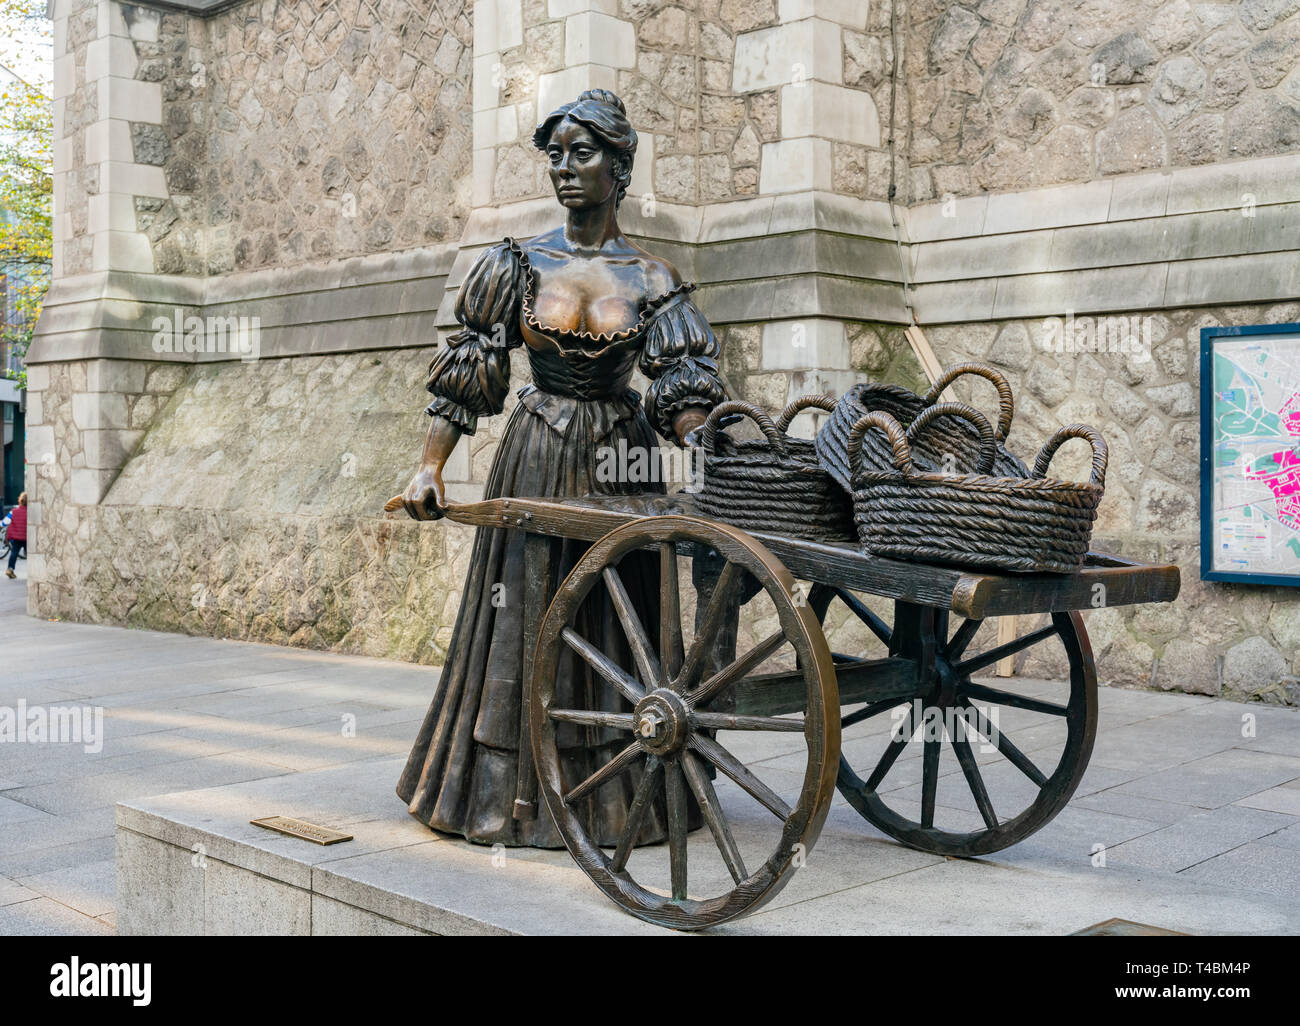 Dublin Oct 28 Morning Exterior View Of The Famous Molly Malone